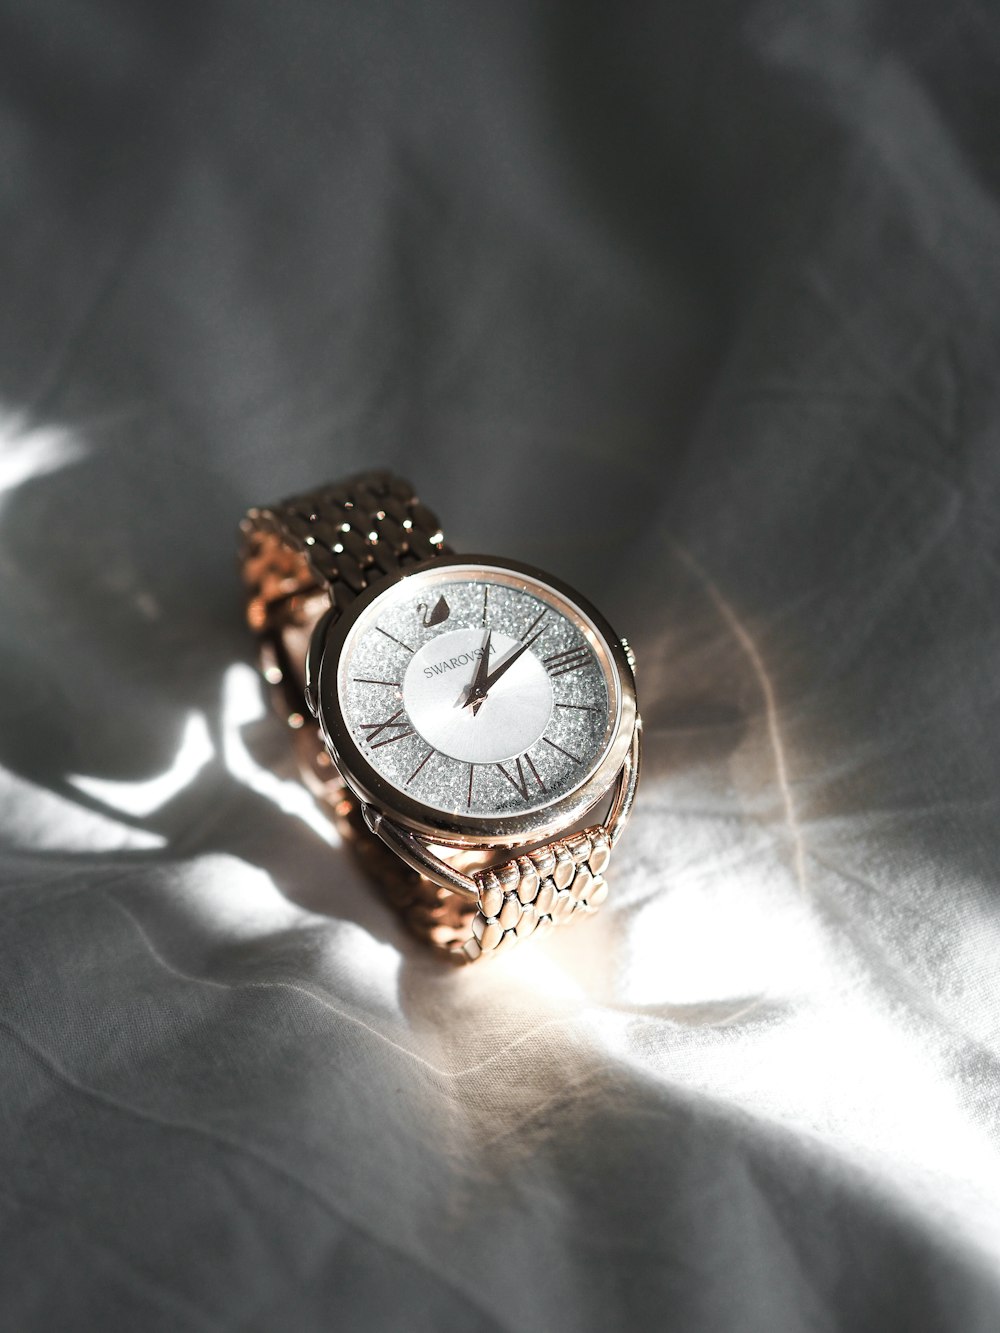 silver and white analog watch